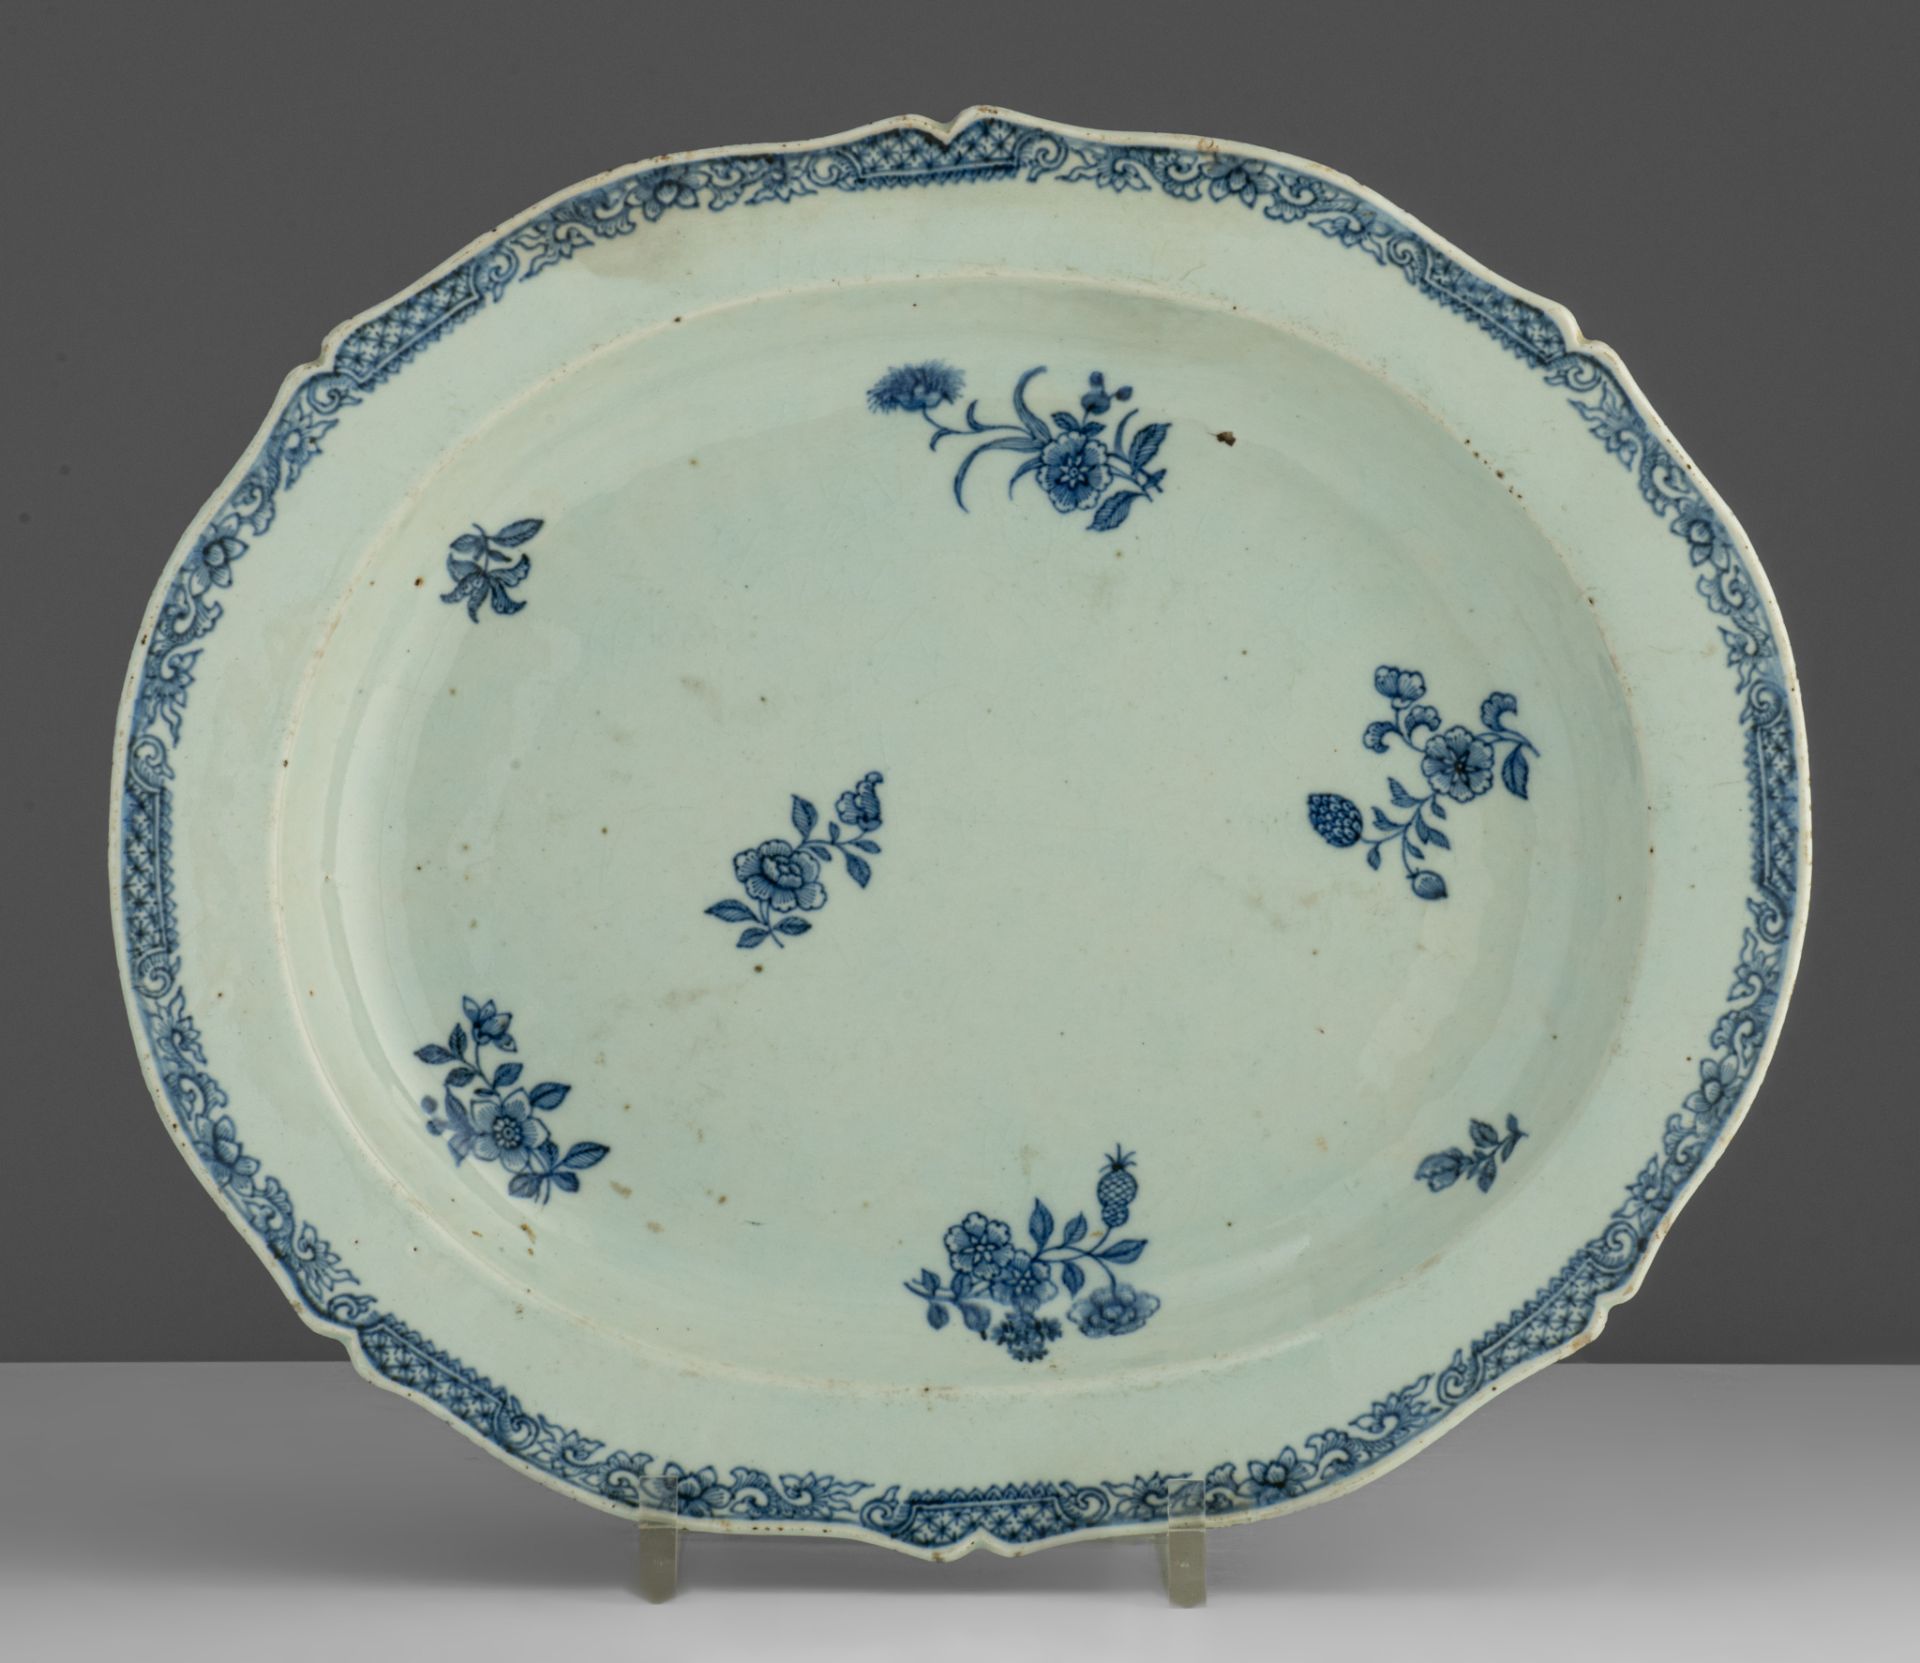 A series of four large Chinese blue and white floral decorated serving plates, 18thC, dia. 33 x 38,5 - Image 6 of 9